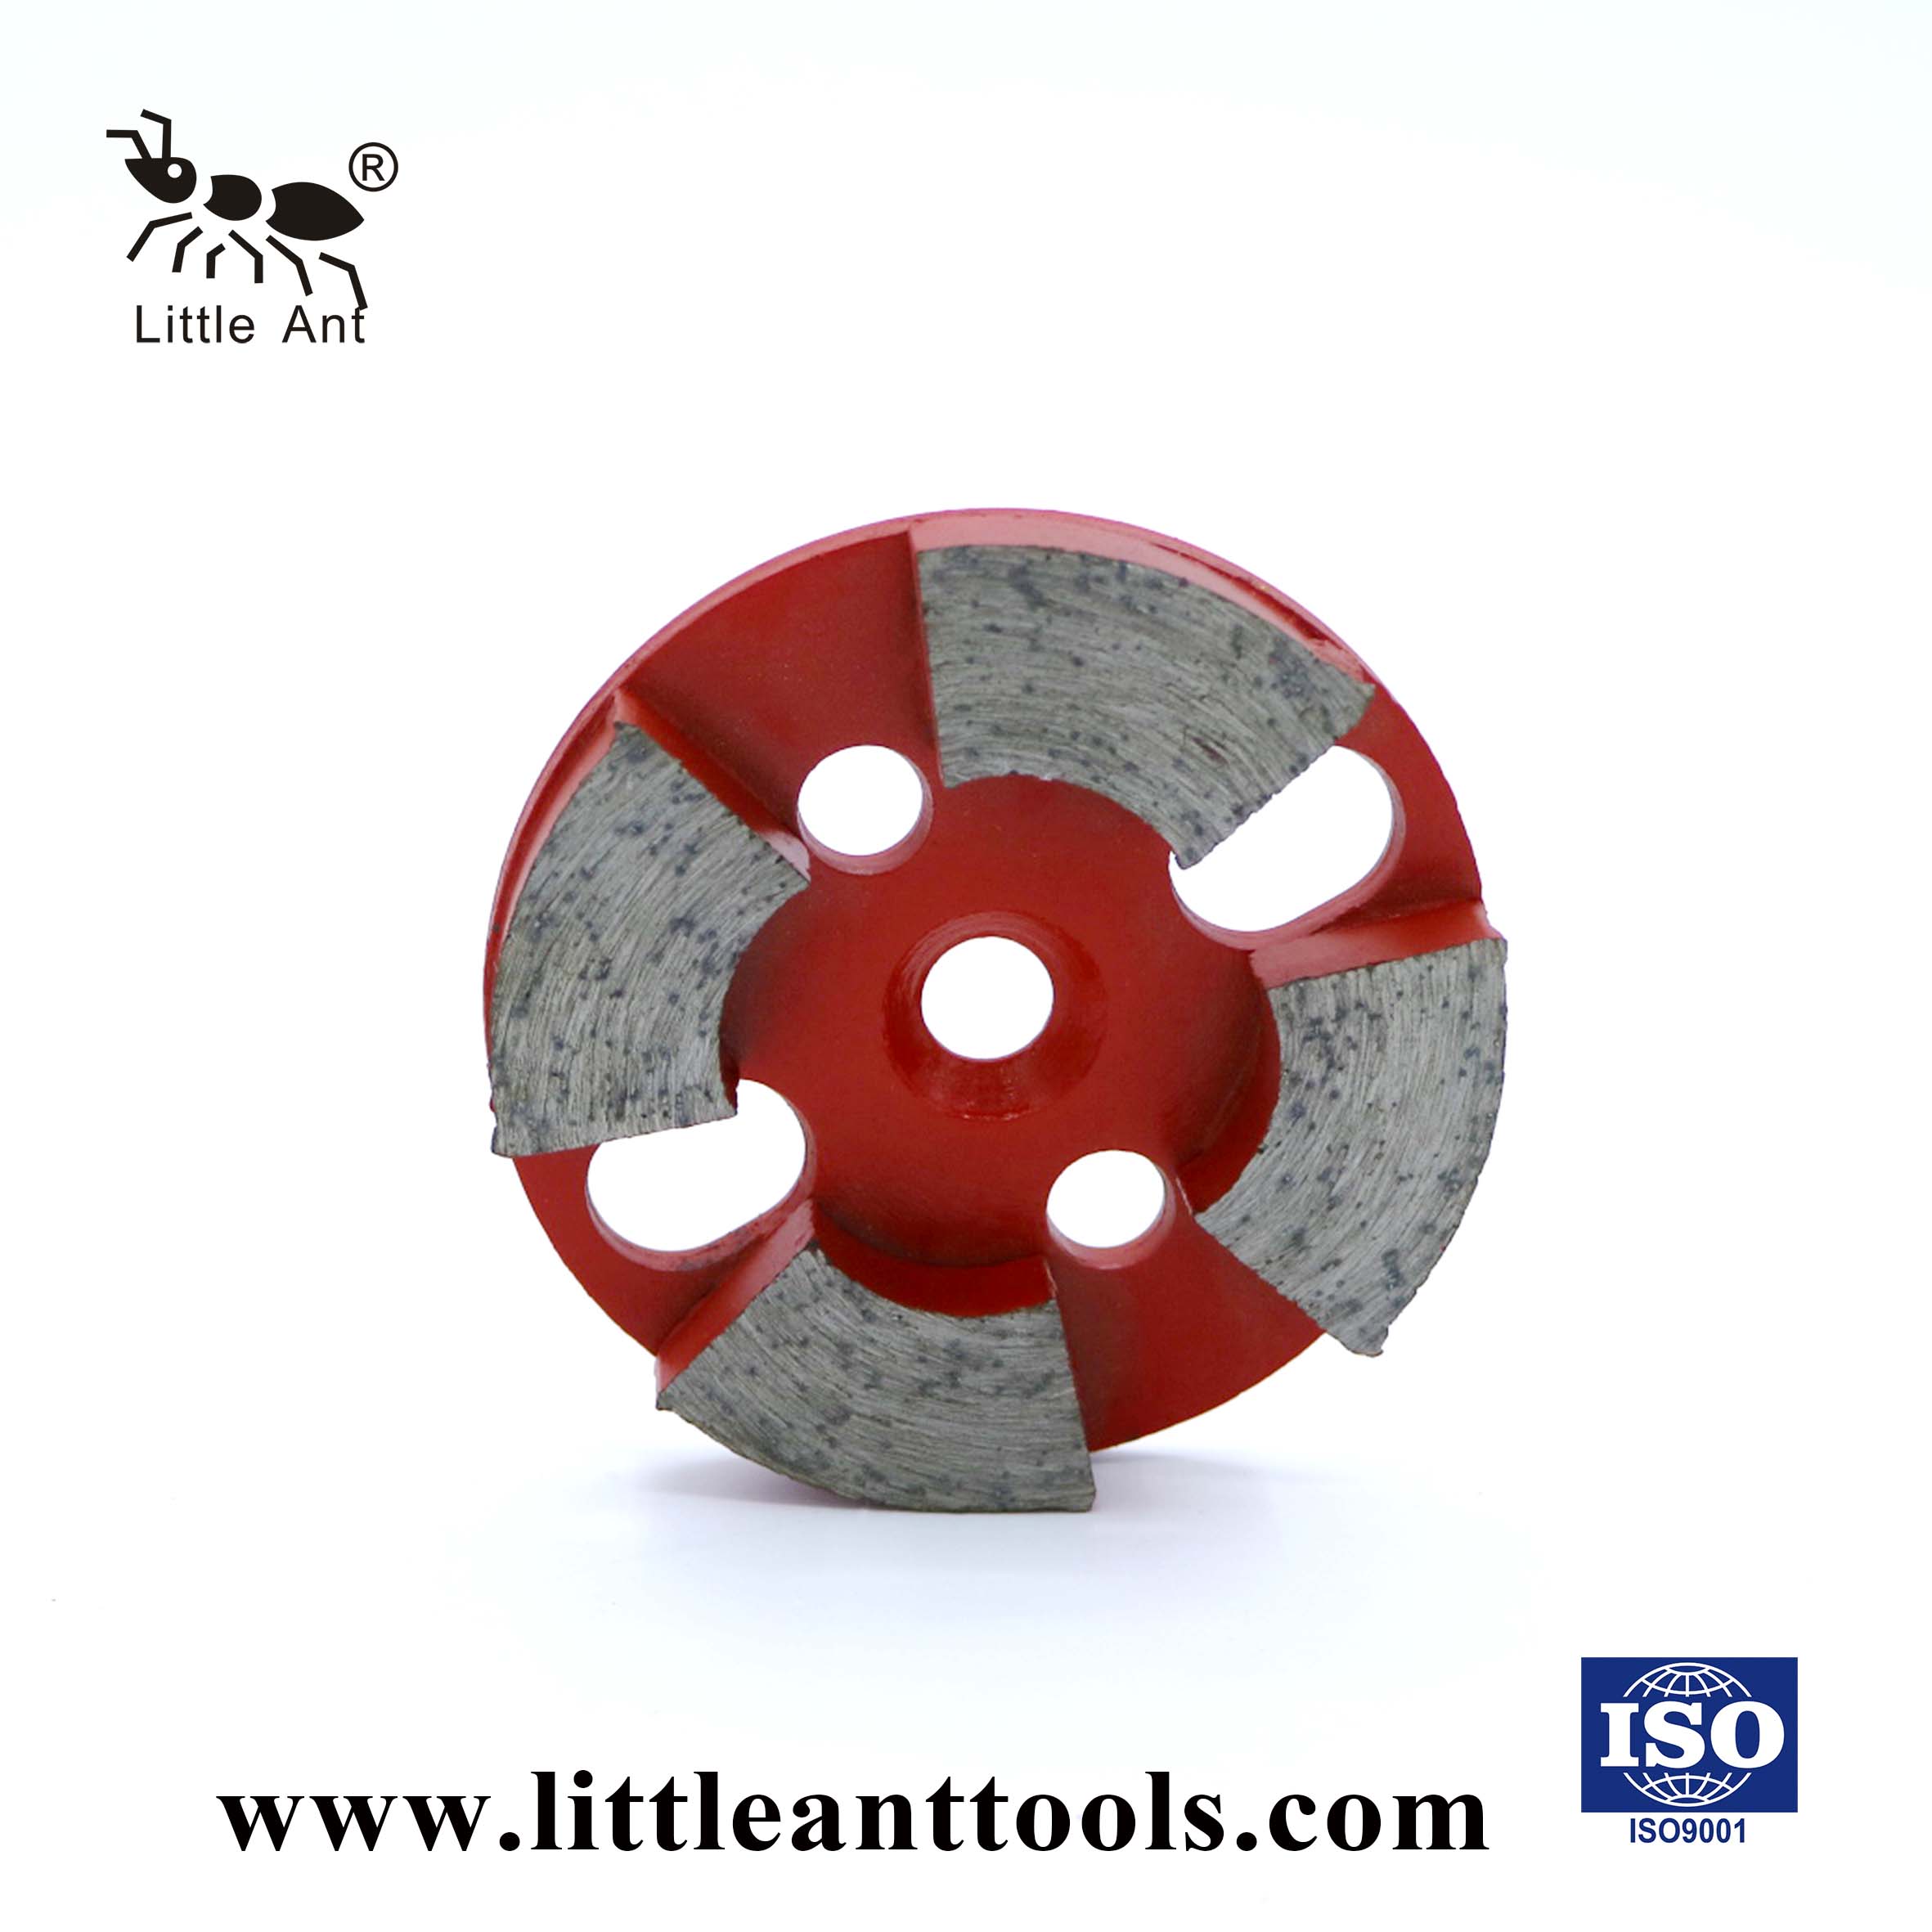 Circular Metal Grinding Plate for Concrete Sector Gear Dry And Wet Use Coarse